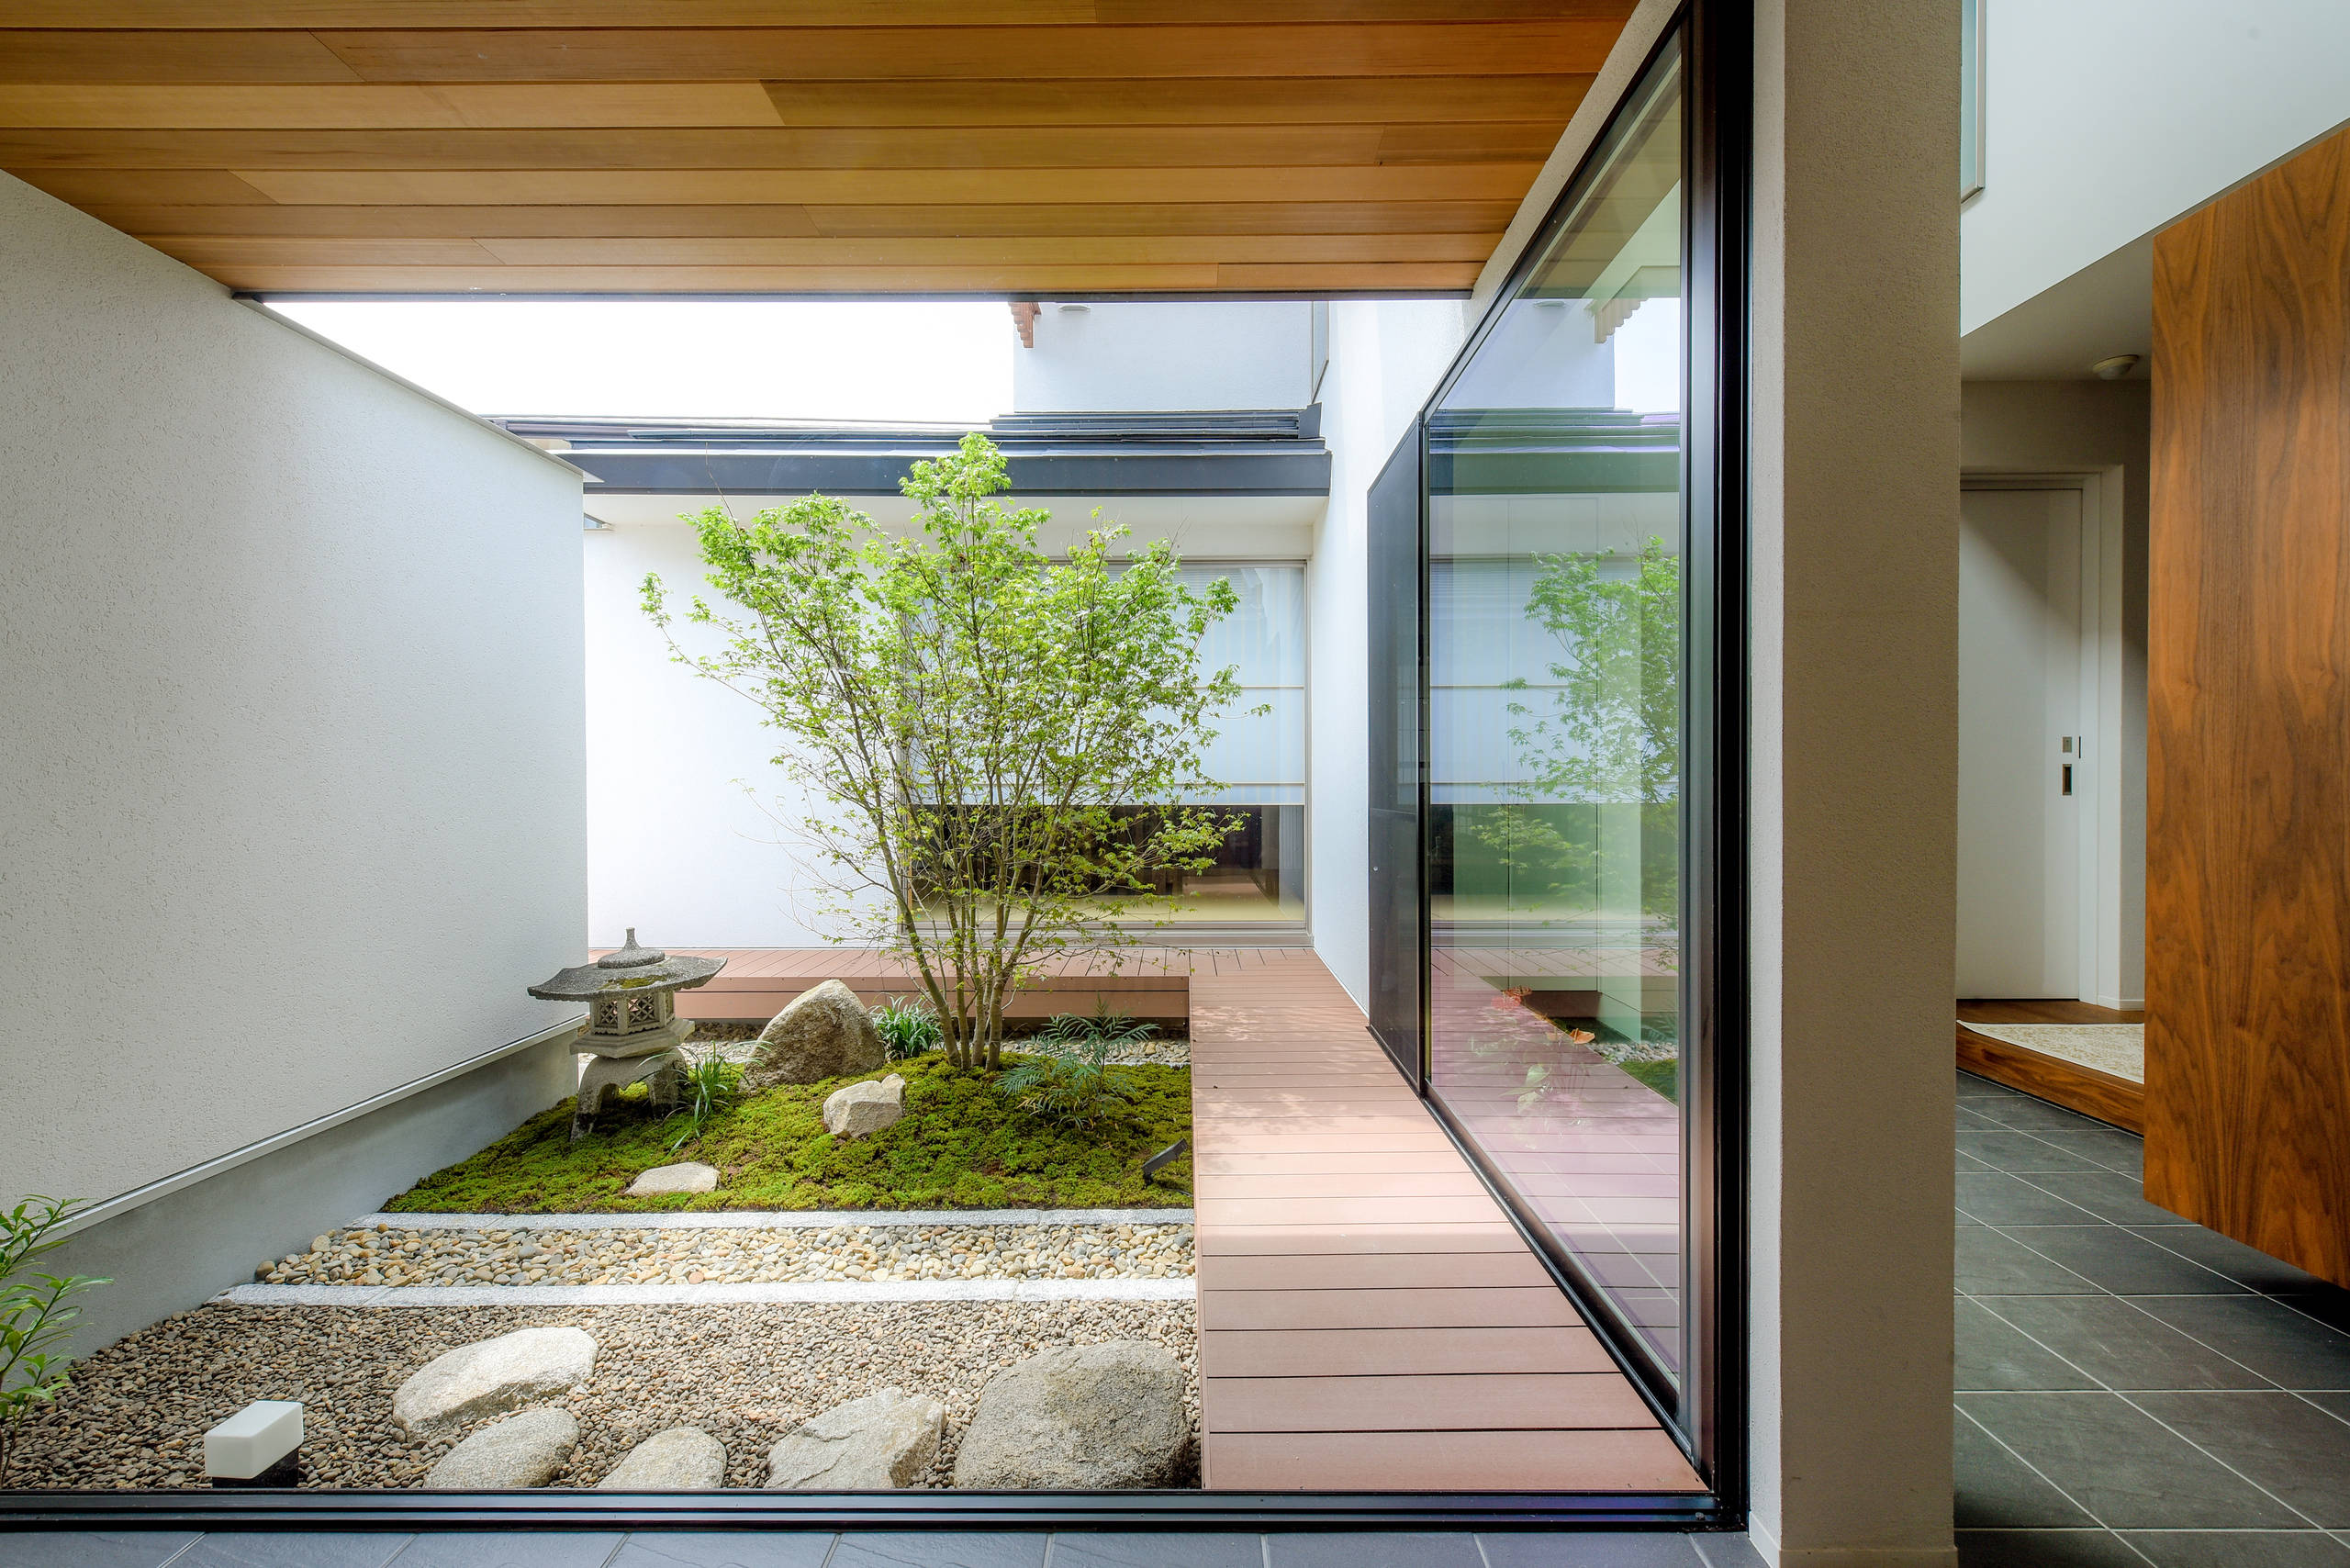 75 Asian White Landscaping Ideas You Ll Love December 22 Houzz